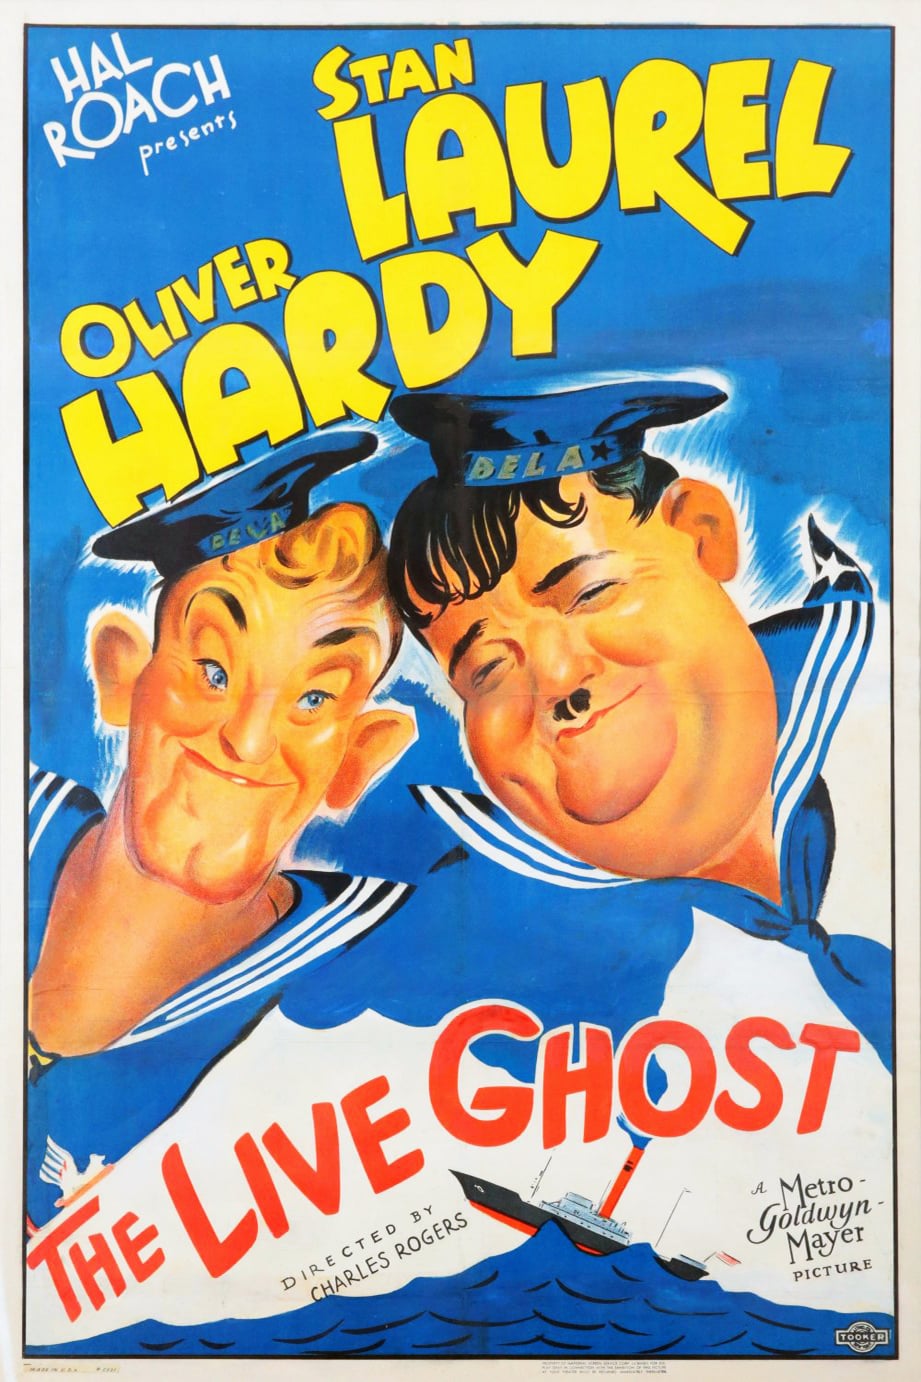 Poster for the movie "The Live Ghost"